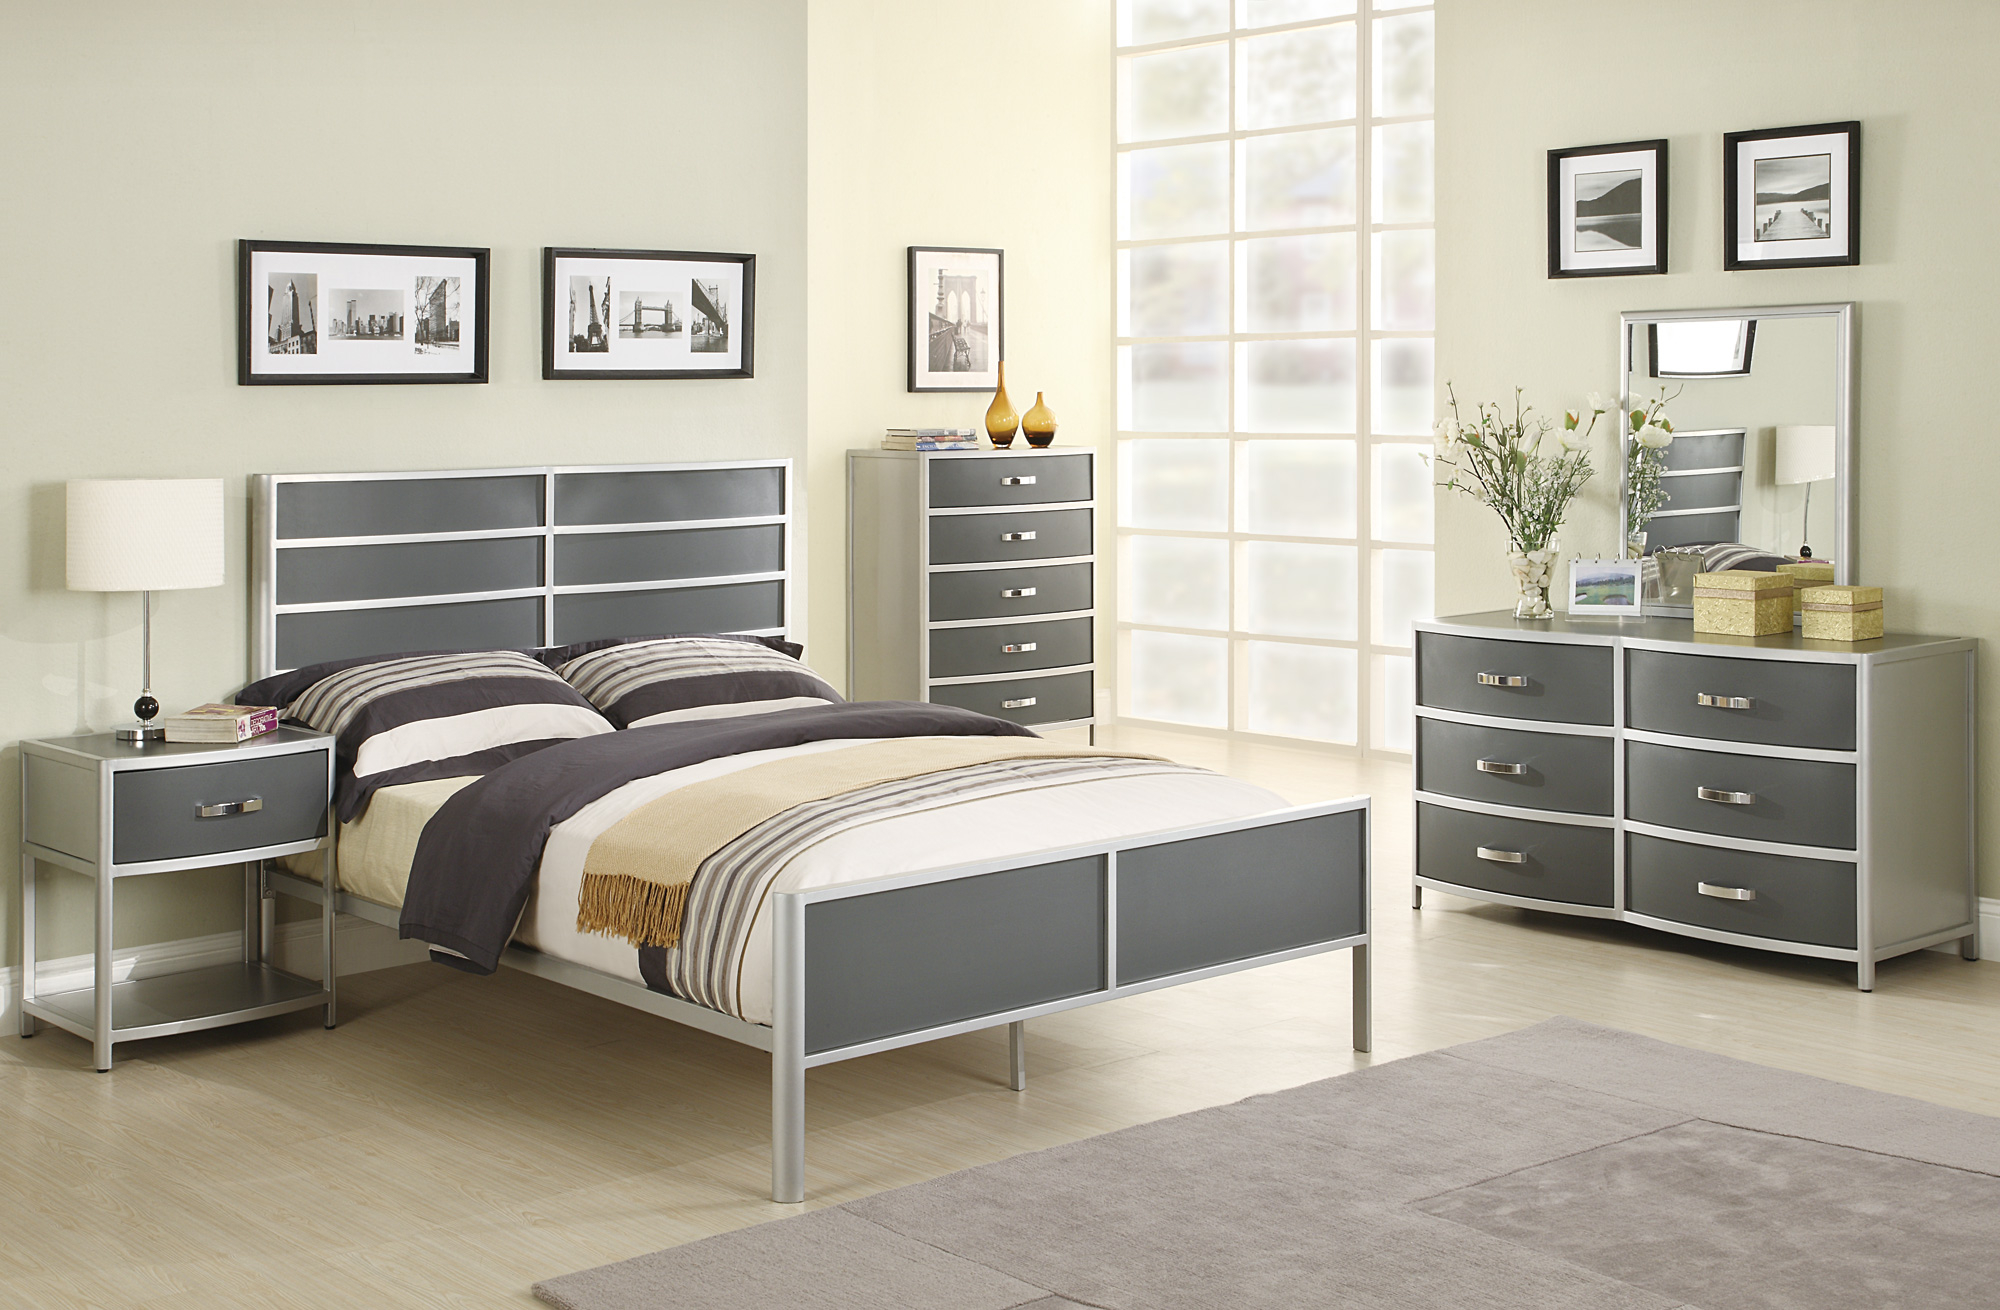 Coaster furniture dewey collection silver bedroom set twin bed night